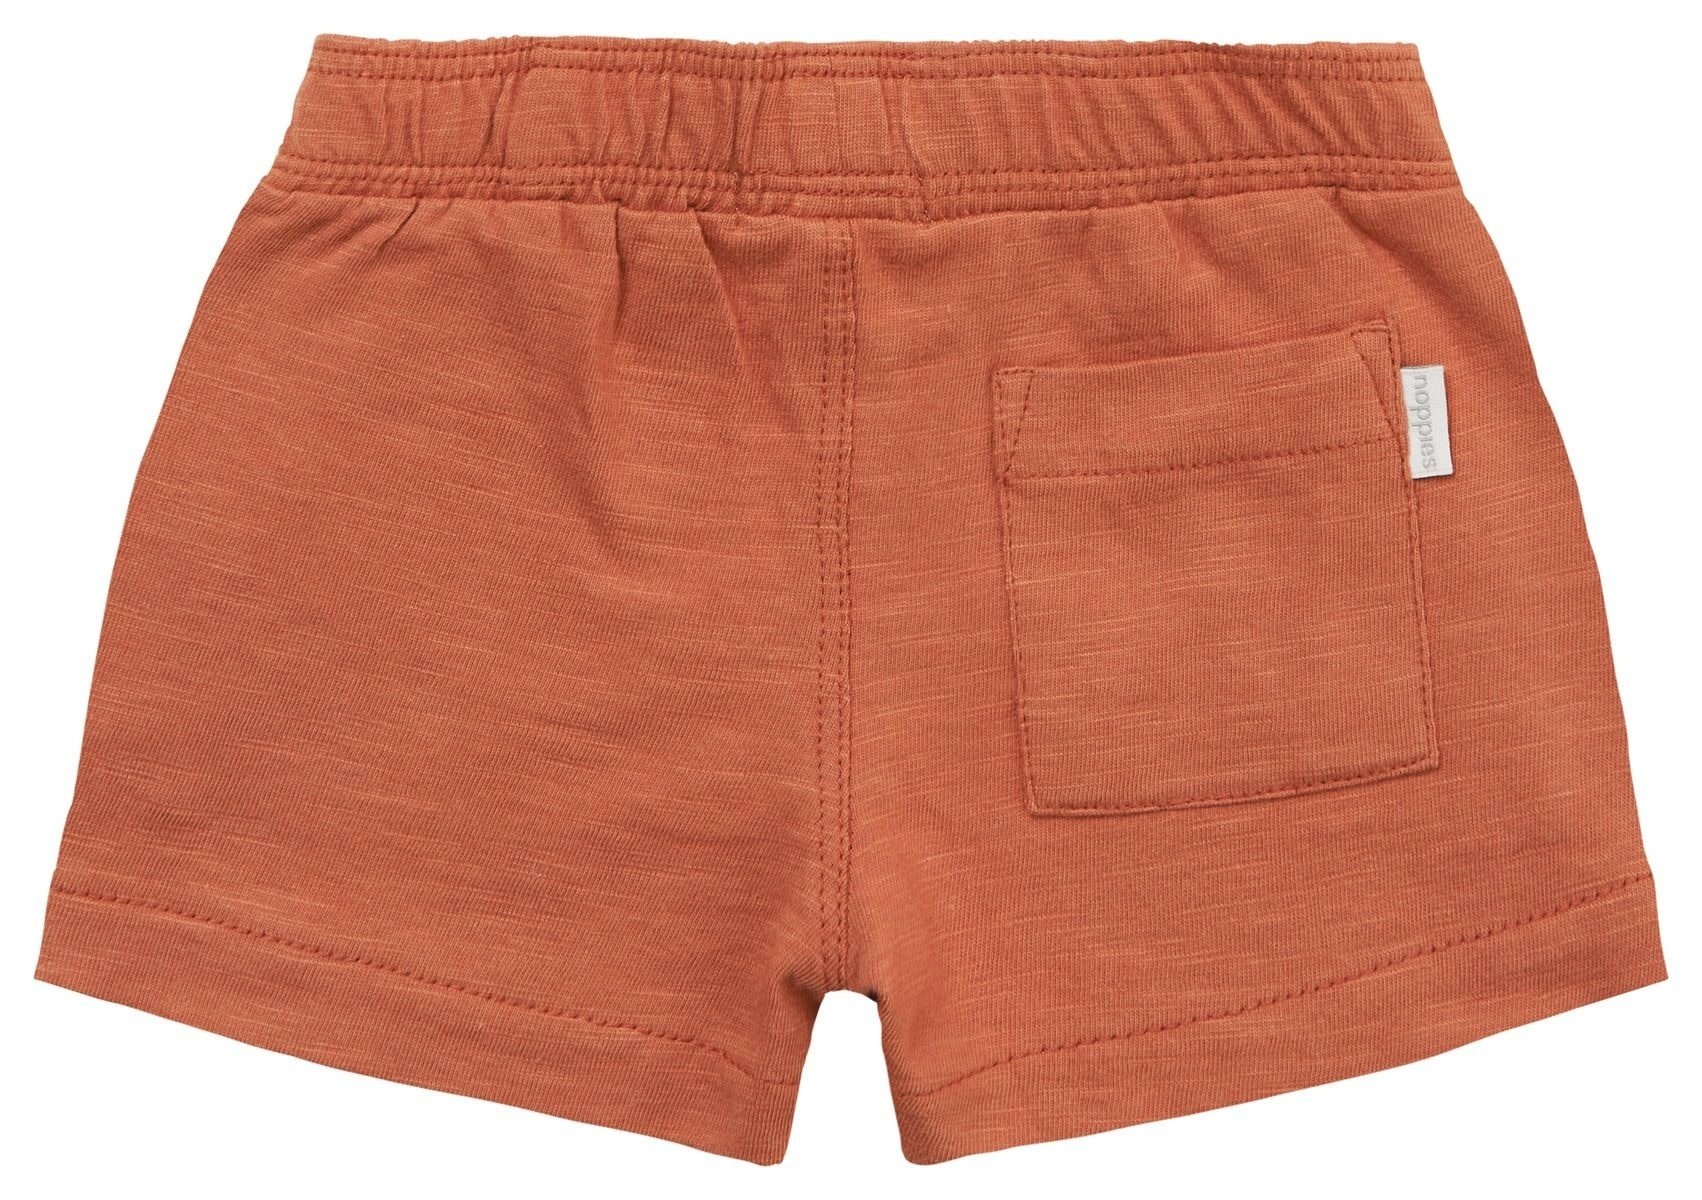 Noppies Madrid Shorts  - Size 80 (9-12 months)